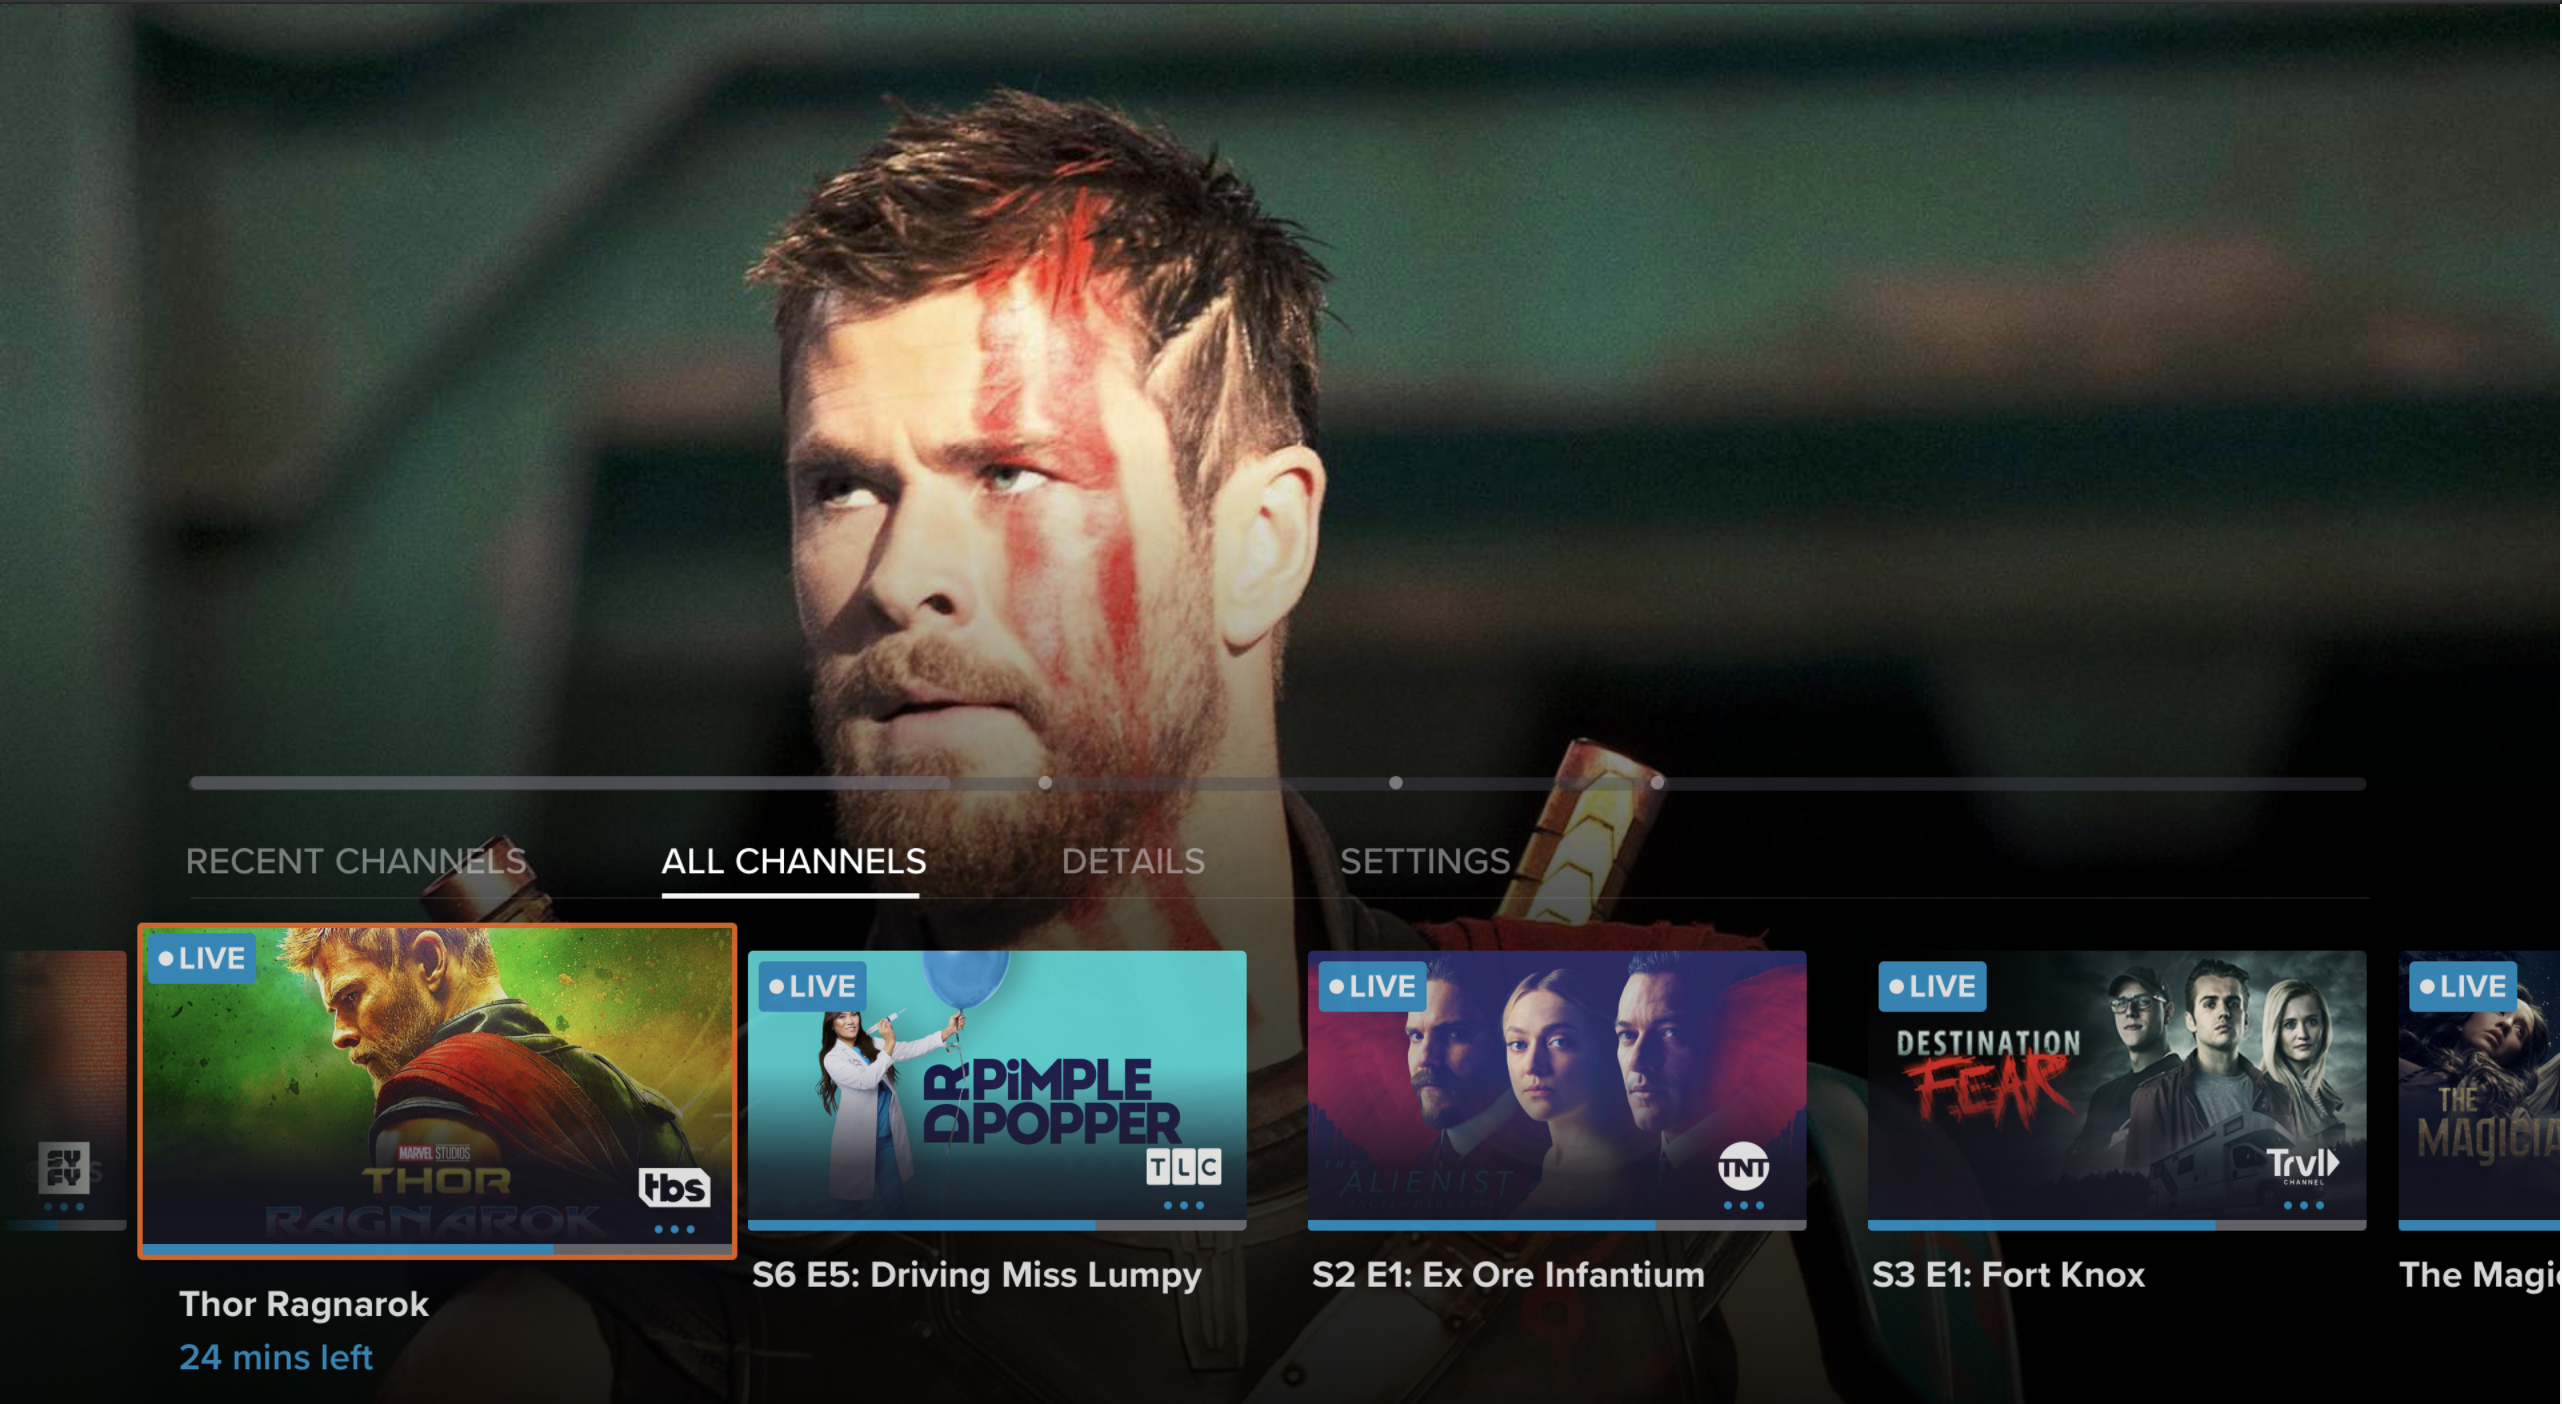 New at SLING TV More Innovations, Features and Content